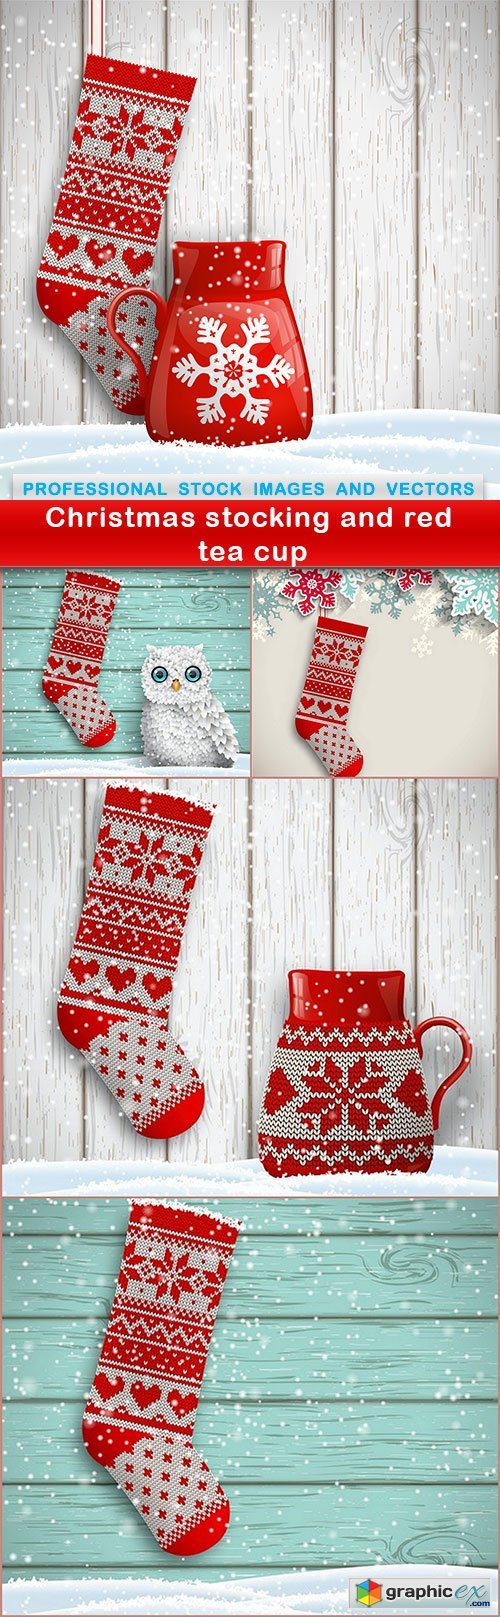 Christmas stocking and red tea cup - 5 EPS